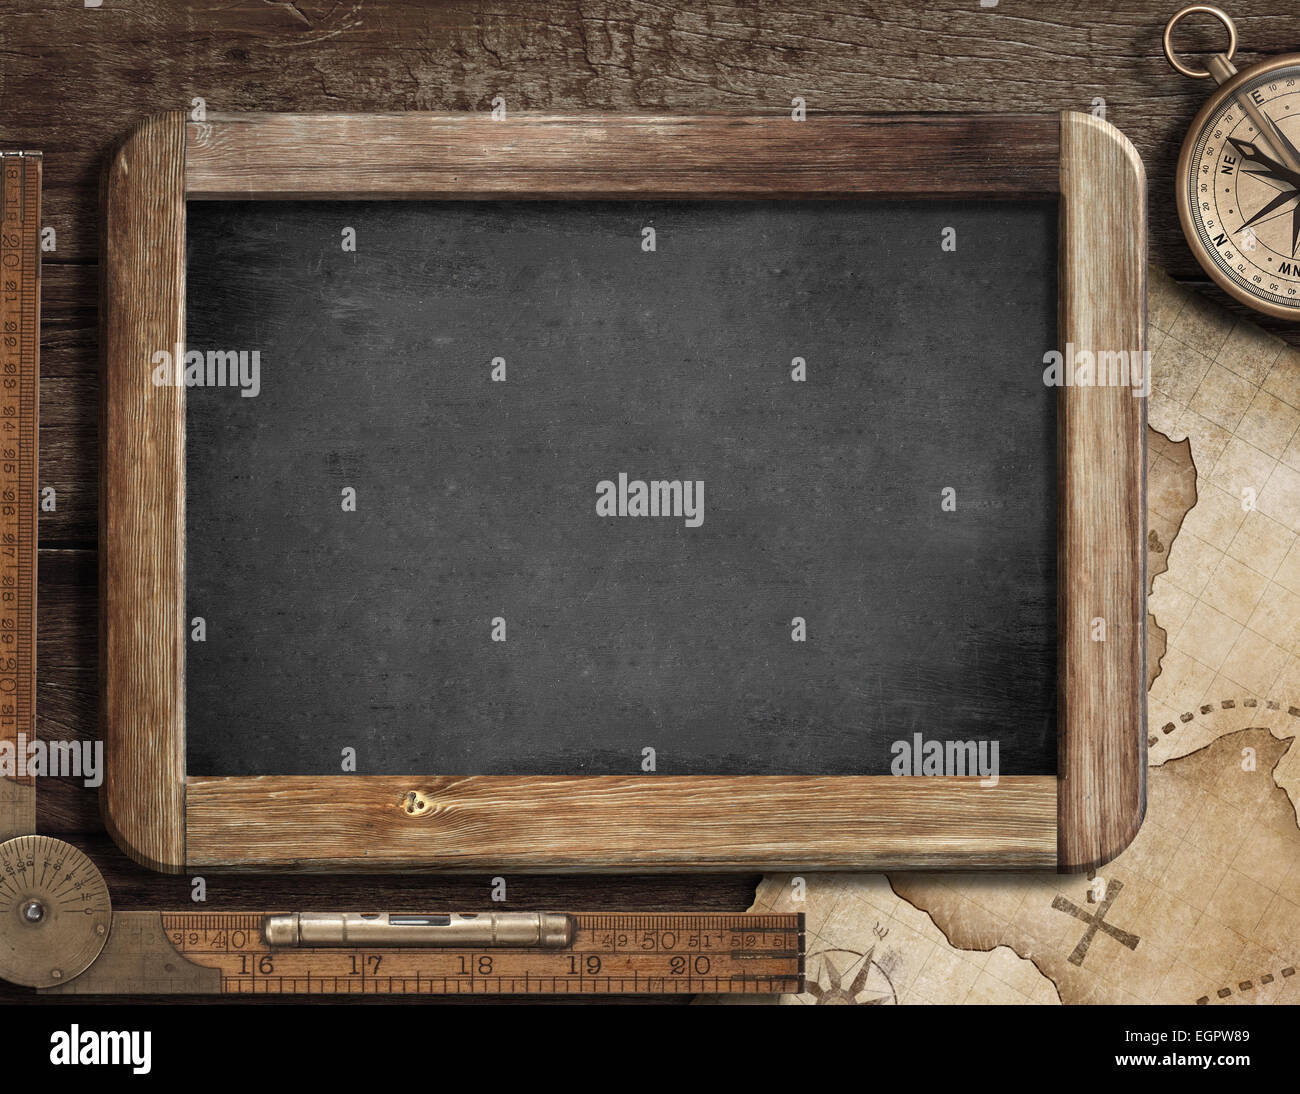 Treasure map, blackboard, old compass and ruler on wood desk. Adventure or discovery concept. Stock Photo